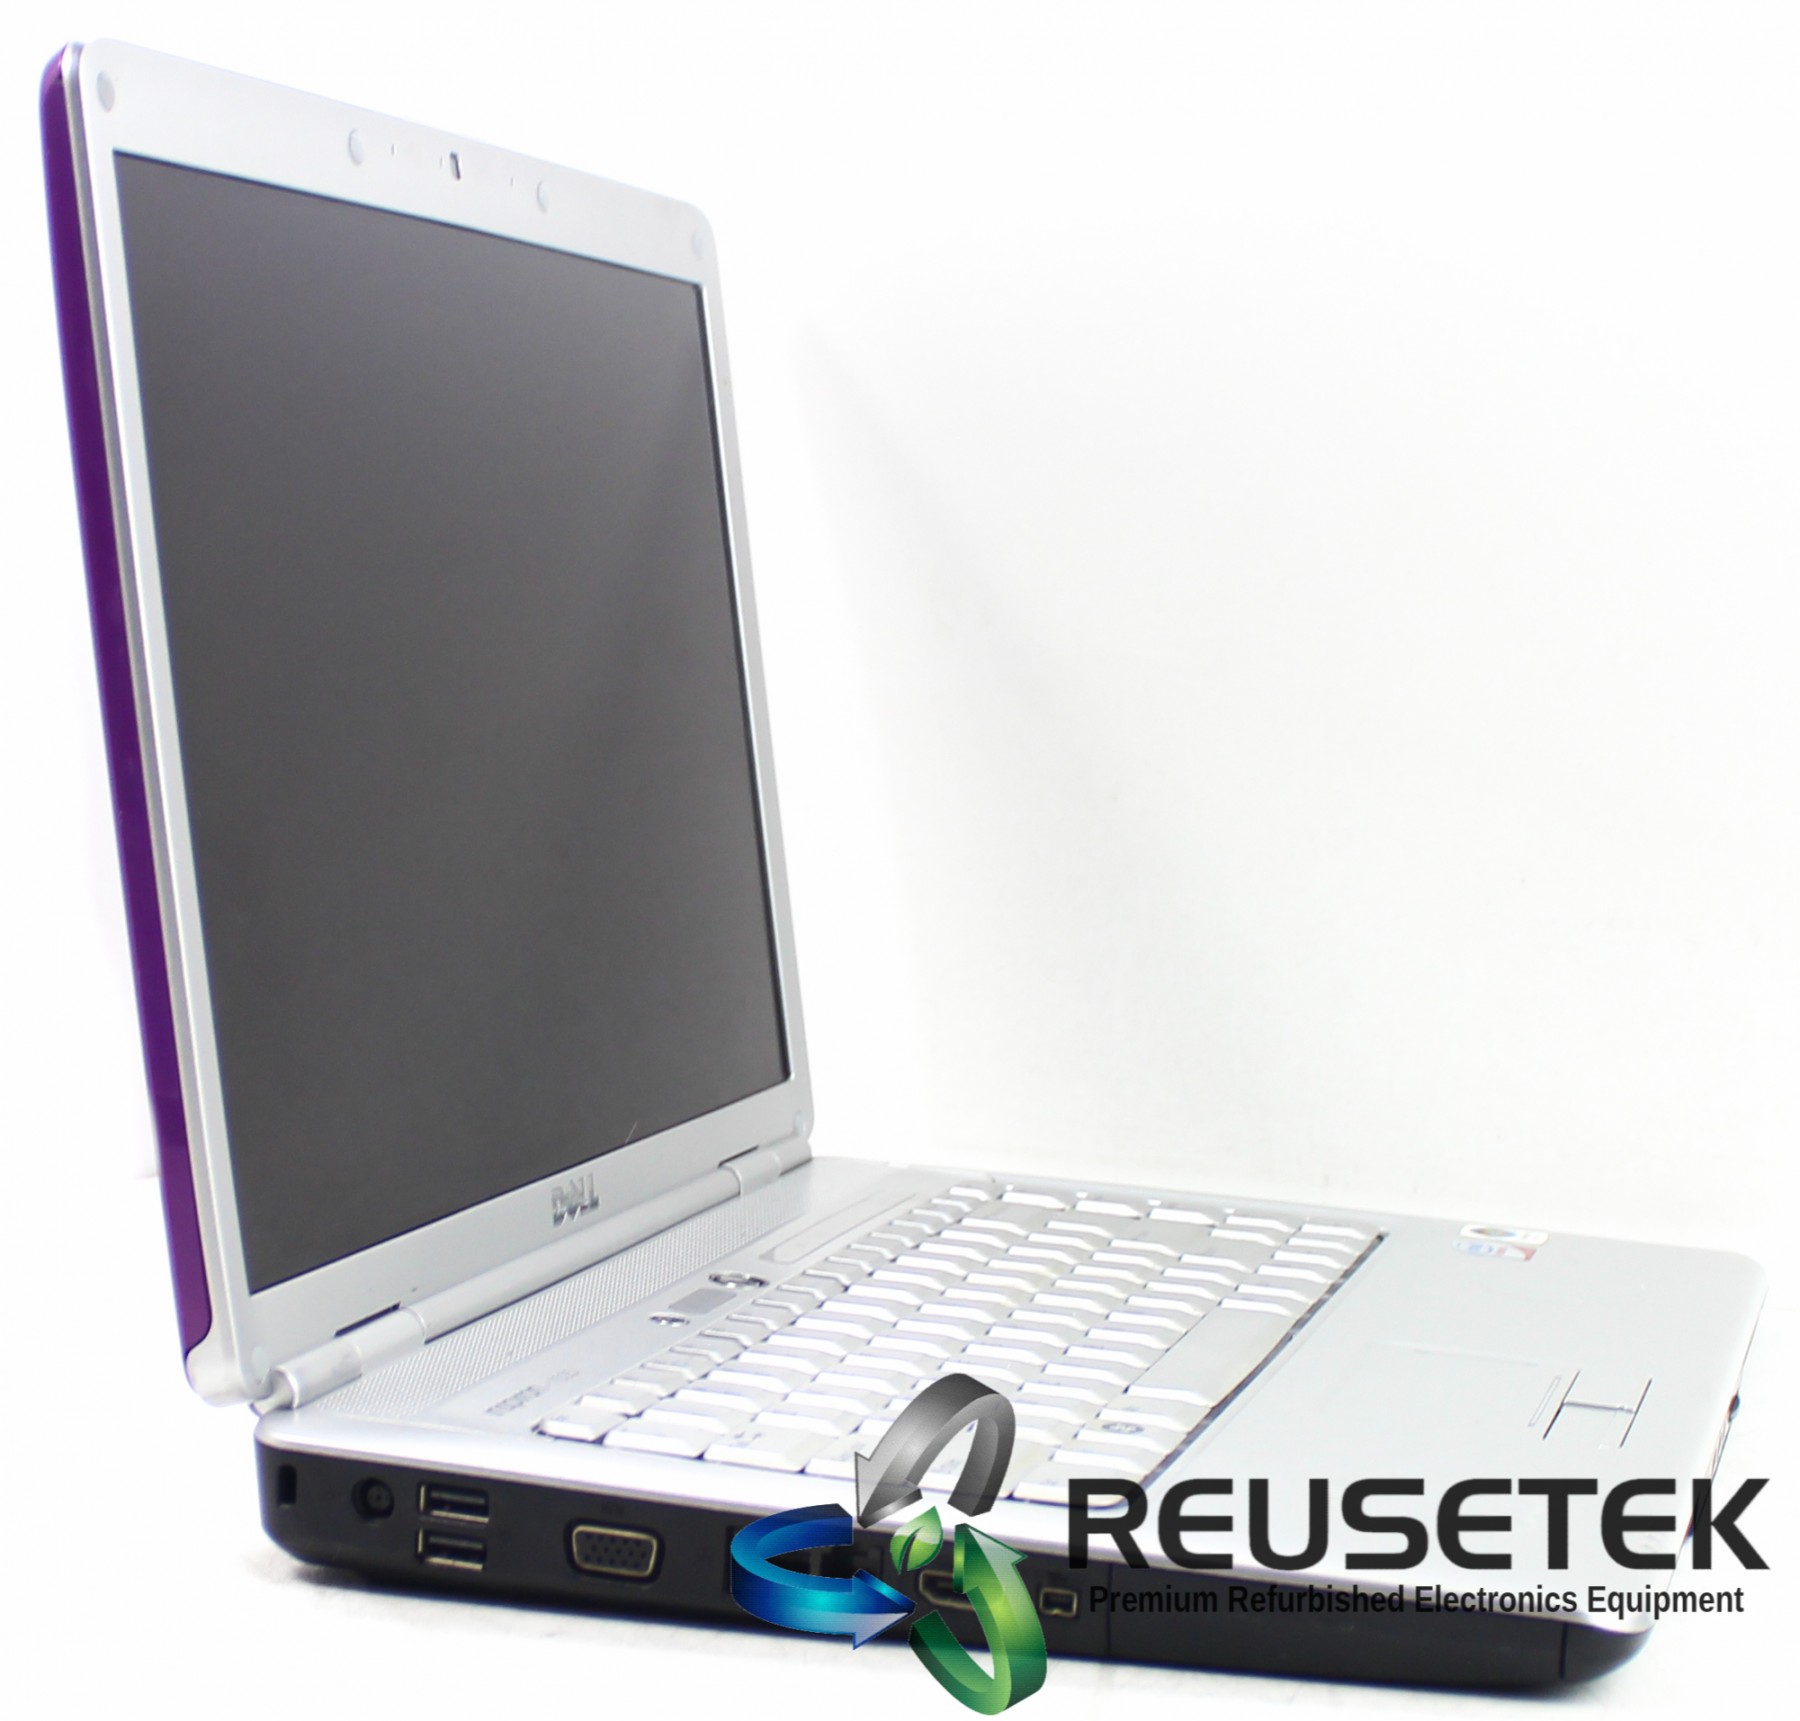 50002434-Dell Inspiron 1525 Laptop (Glossy Purple)-image